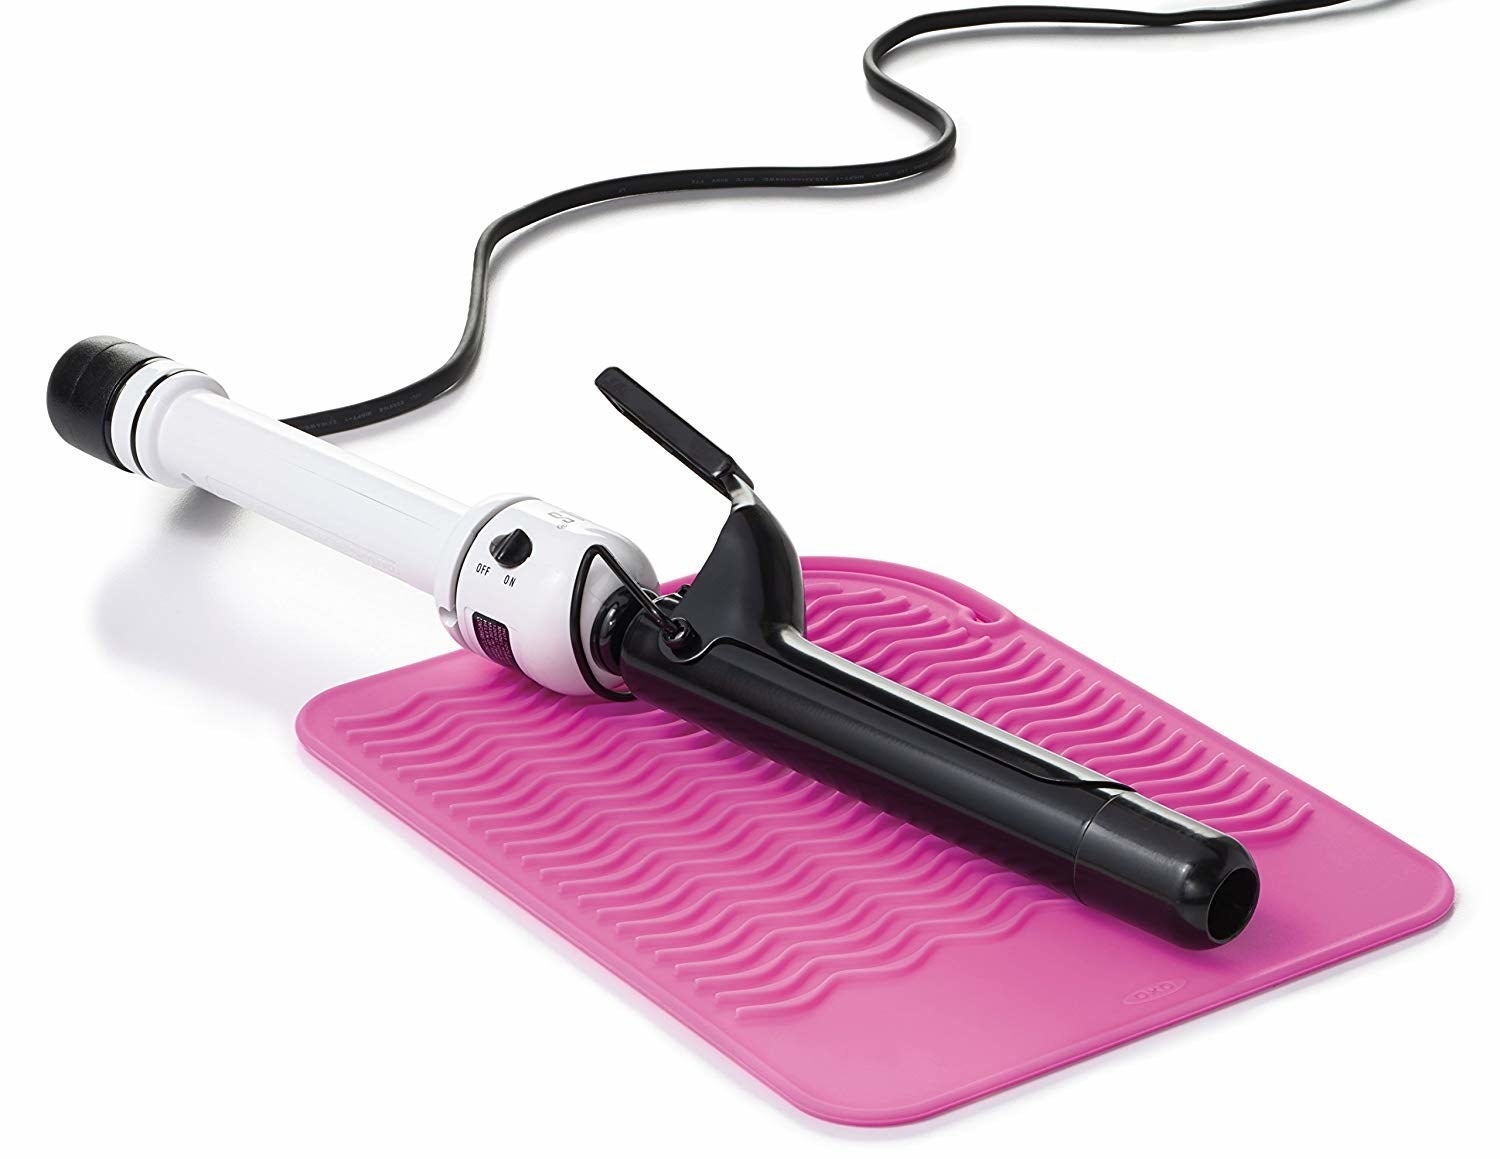 curling iron laying on textured hot pink silicone mat